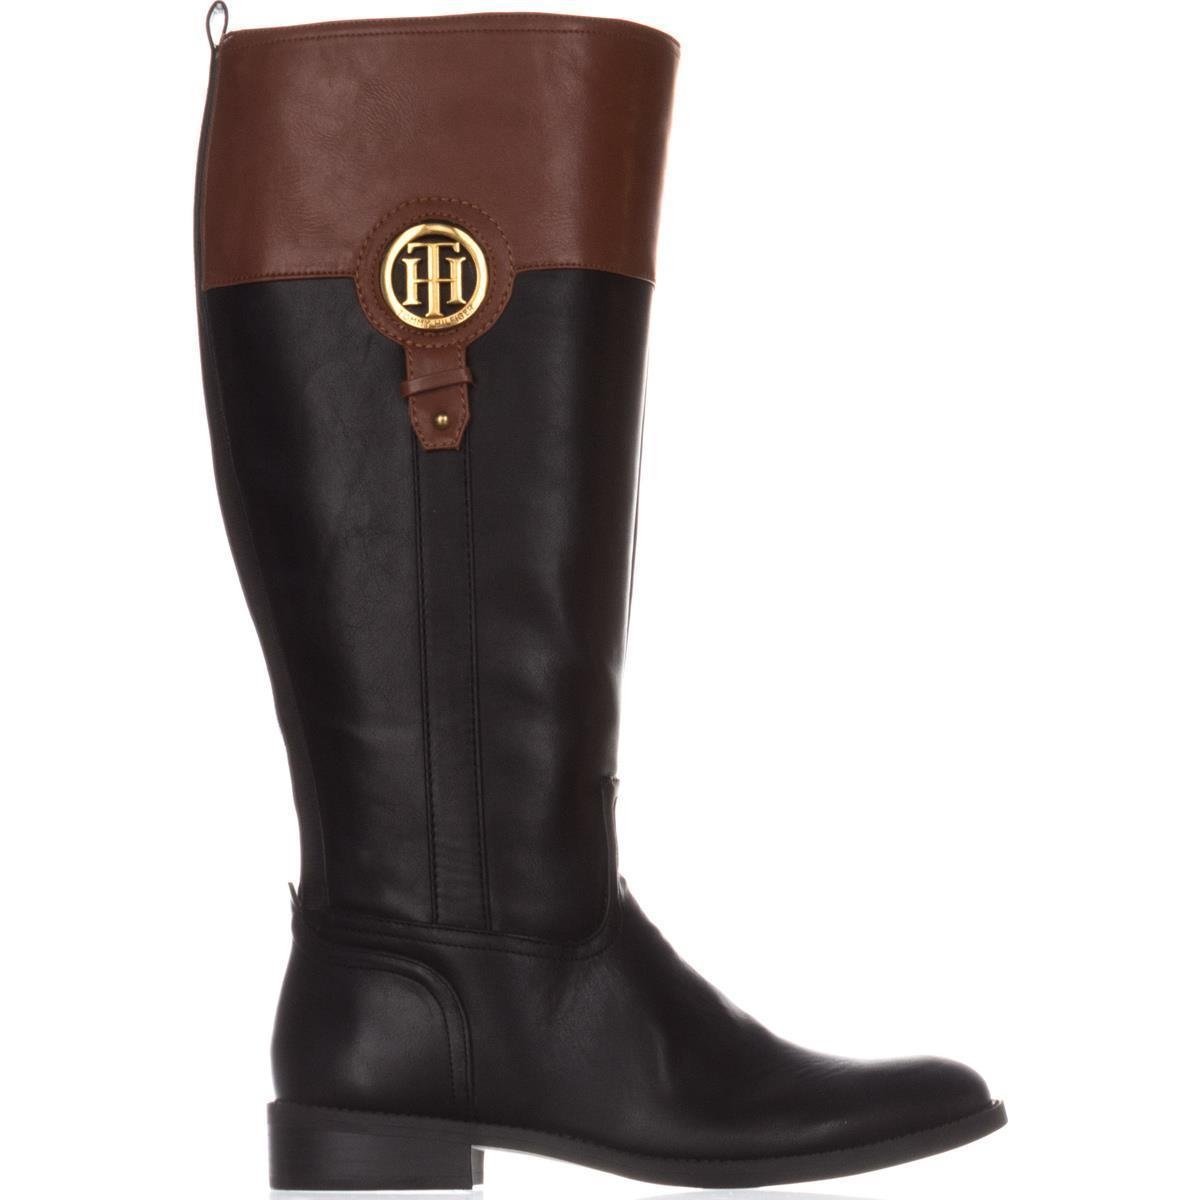 Tommy Hilfiger Womens Ilia4 Round Toe Knee High Riding Boots